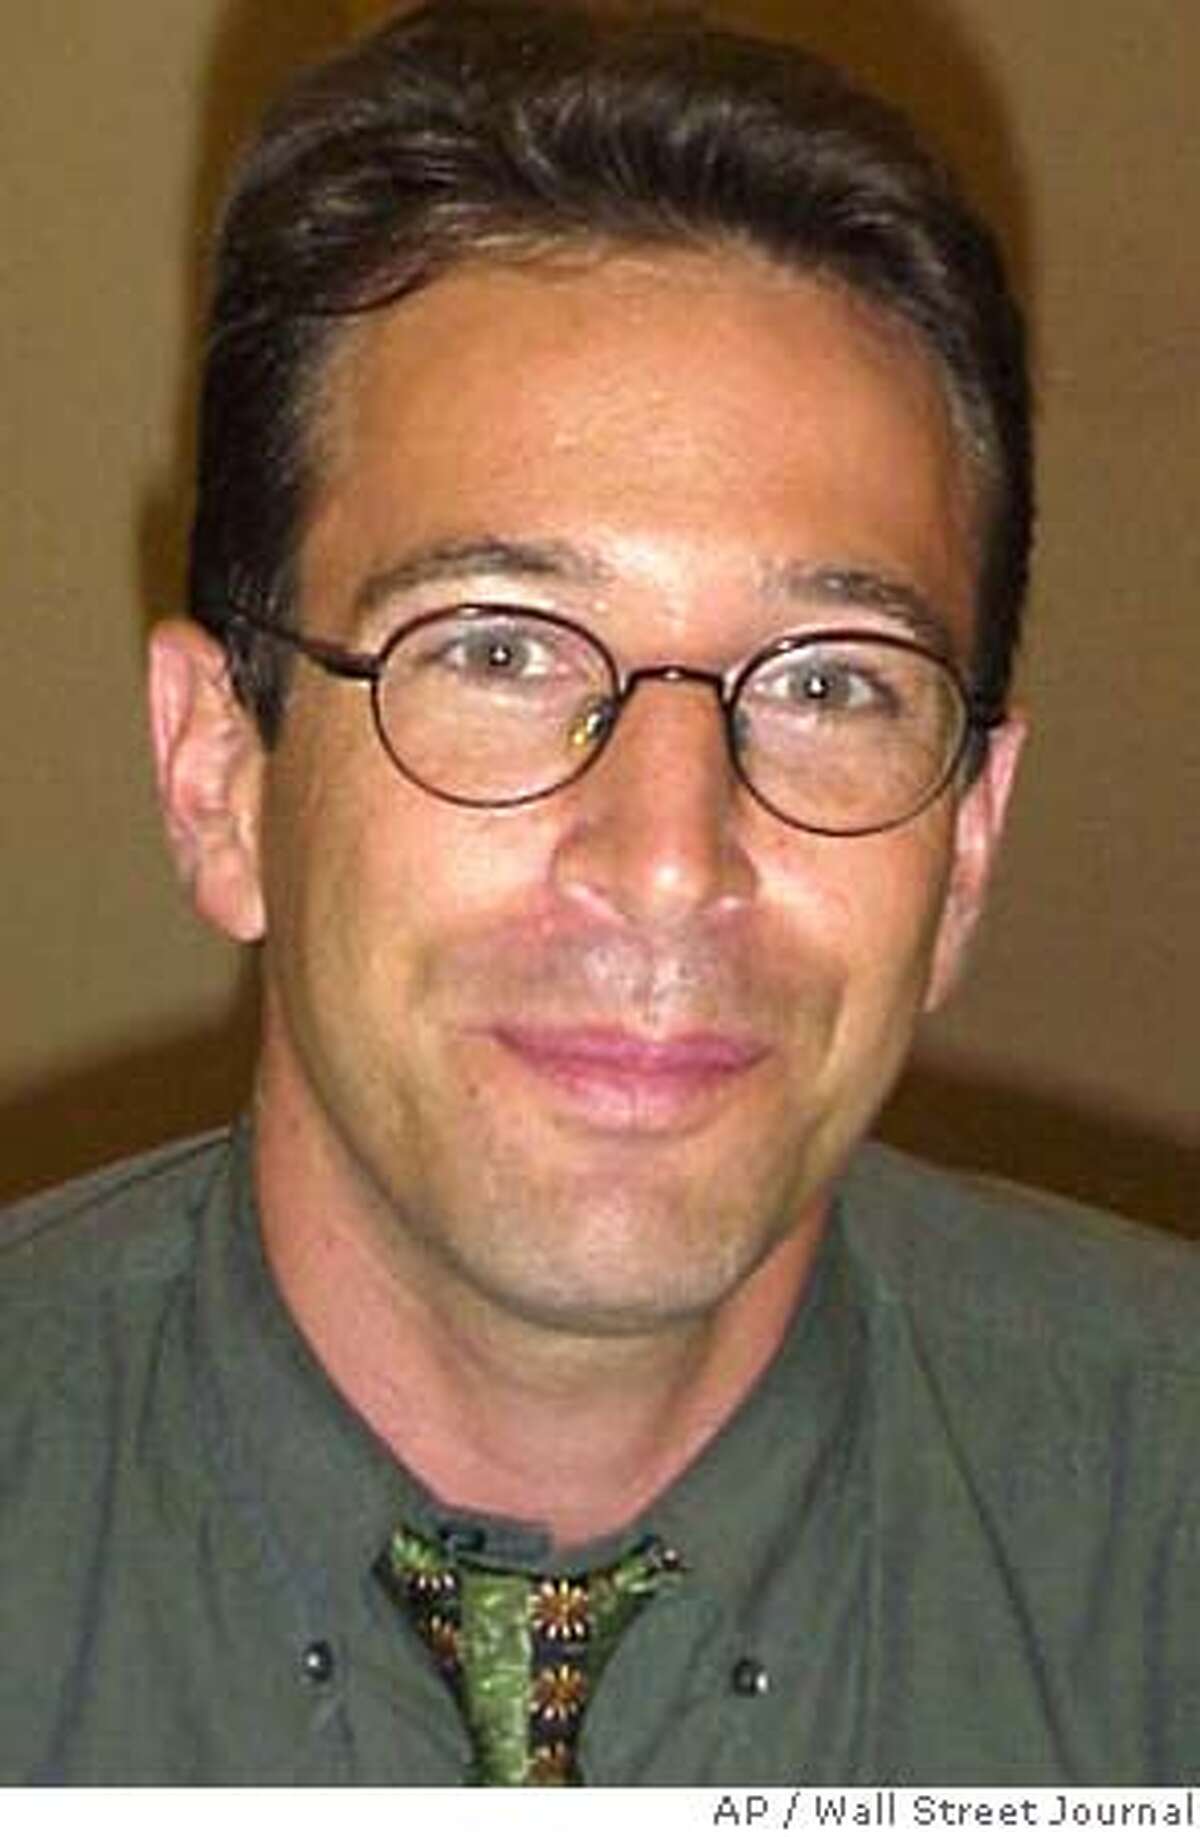 ** FILE ** Wall Street Journal reporter Daniel Pearl is shown in this undated file photo. American authorities investigating the killing of Pearl in Pakistan now believe that he was slain by Khalid Shaikh Mohammed, the alleged mastermind of the Sept. 11 attacks. (AP Photo/Wall Street Journal) ALSO RAN: 1/1/2004 Daniel Pearl, left, was slain by Khalid Shaikh Mohammed, right, U.S. officials say. Photo caption pearl22_PH11012003200WALL STREET JOURNAL** FILE ** Wall Street Journal reporter Daniel Pearl is shown in this undated file photo. American authorities investigating the killing of Pearl in Pakistan now believe that he was slain by Khalid Shaikh Mohammed, the alleged mastermind of the Sept. 11 attacks. (AP Photo-Wall Street Journal)__NO SALES UNDATED PHOTO cat UNDATED PHOTO This photo was in an early 2002 e-mail saying Daniel Pearl was being held to protest treatment of prisoners at Guantanamo Bay. Judea Pearl speaks at an Arlington, Va., ceremony honoring 31 journalists who died in the line of duty in 2002. Nation#MainNews#Chronicle#1/1/2004#ALL#3star##0421449659